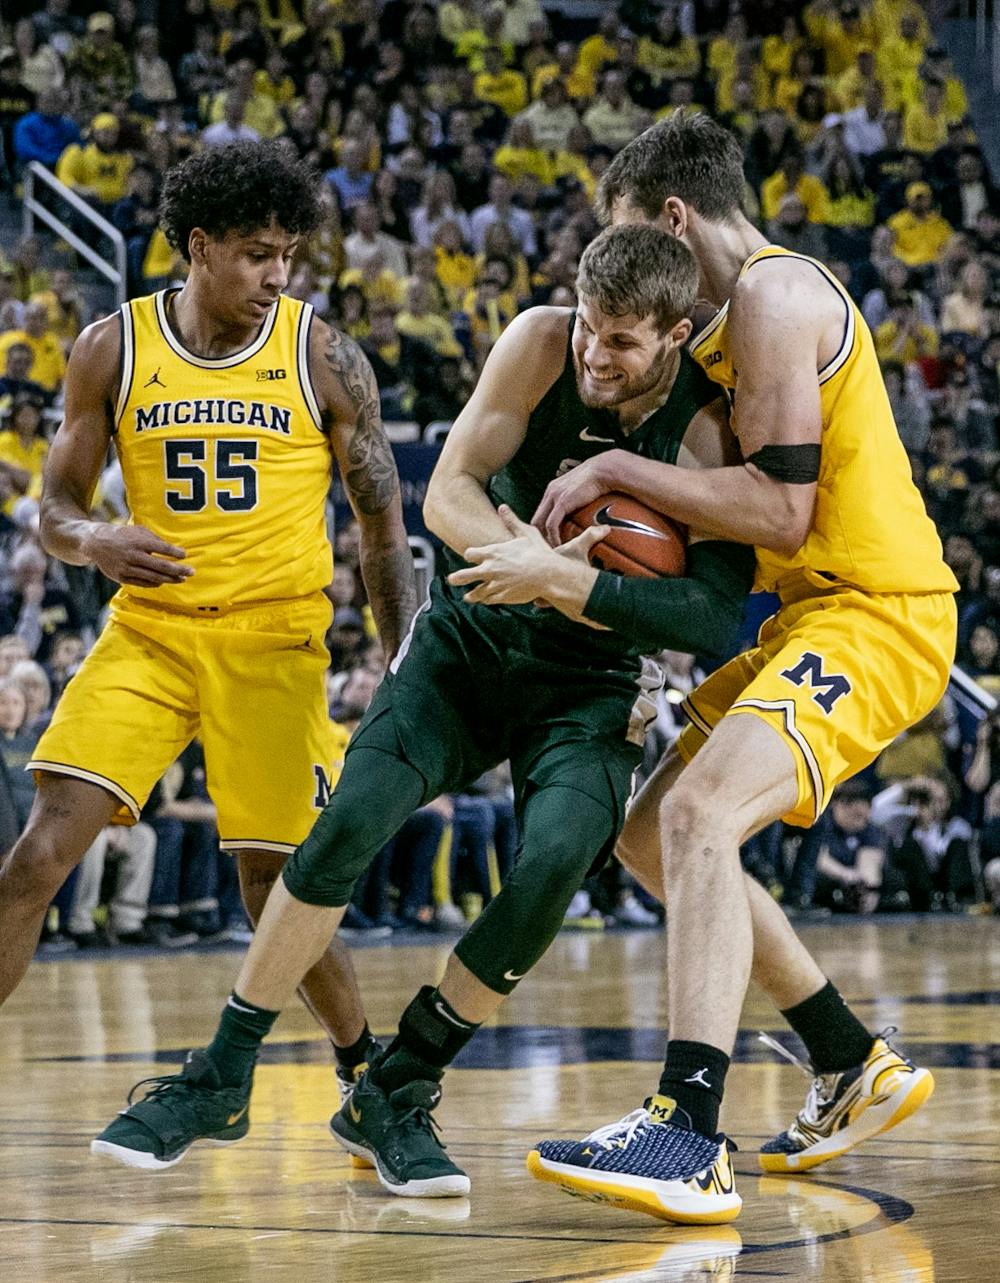 <p>Redshirt senior forward Kyle Ahrens (0) fights for a loose ball during the game against Michigan Feb. 8, 2020 at the Crisler Center. The Spartans fell to the Wolverines, 77-68.</p>